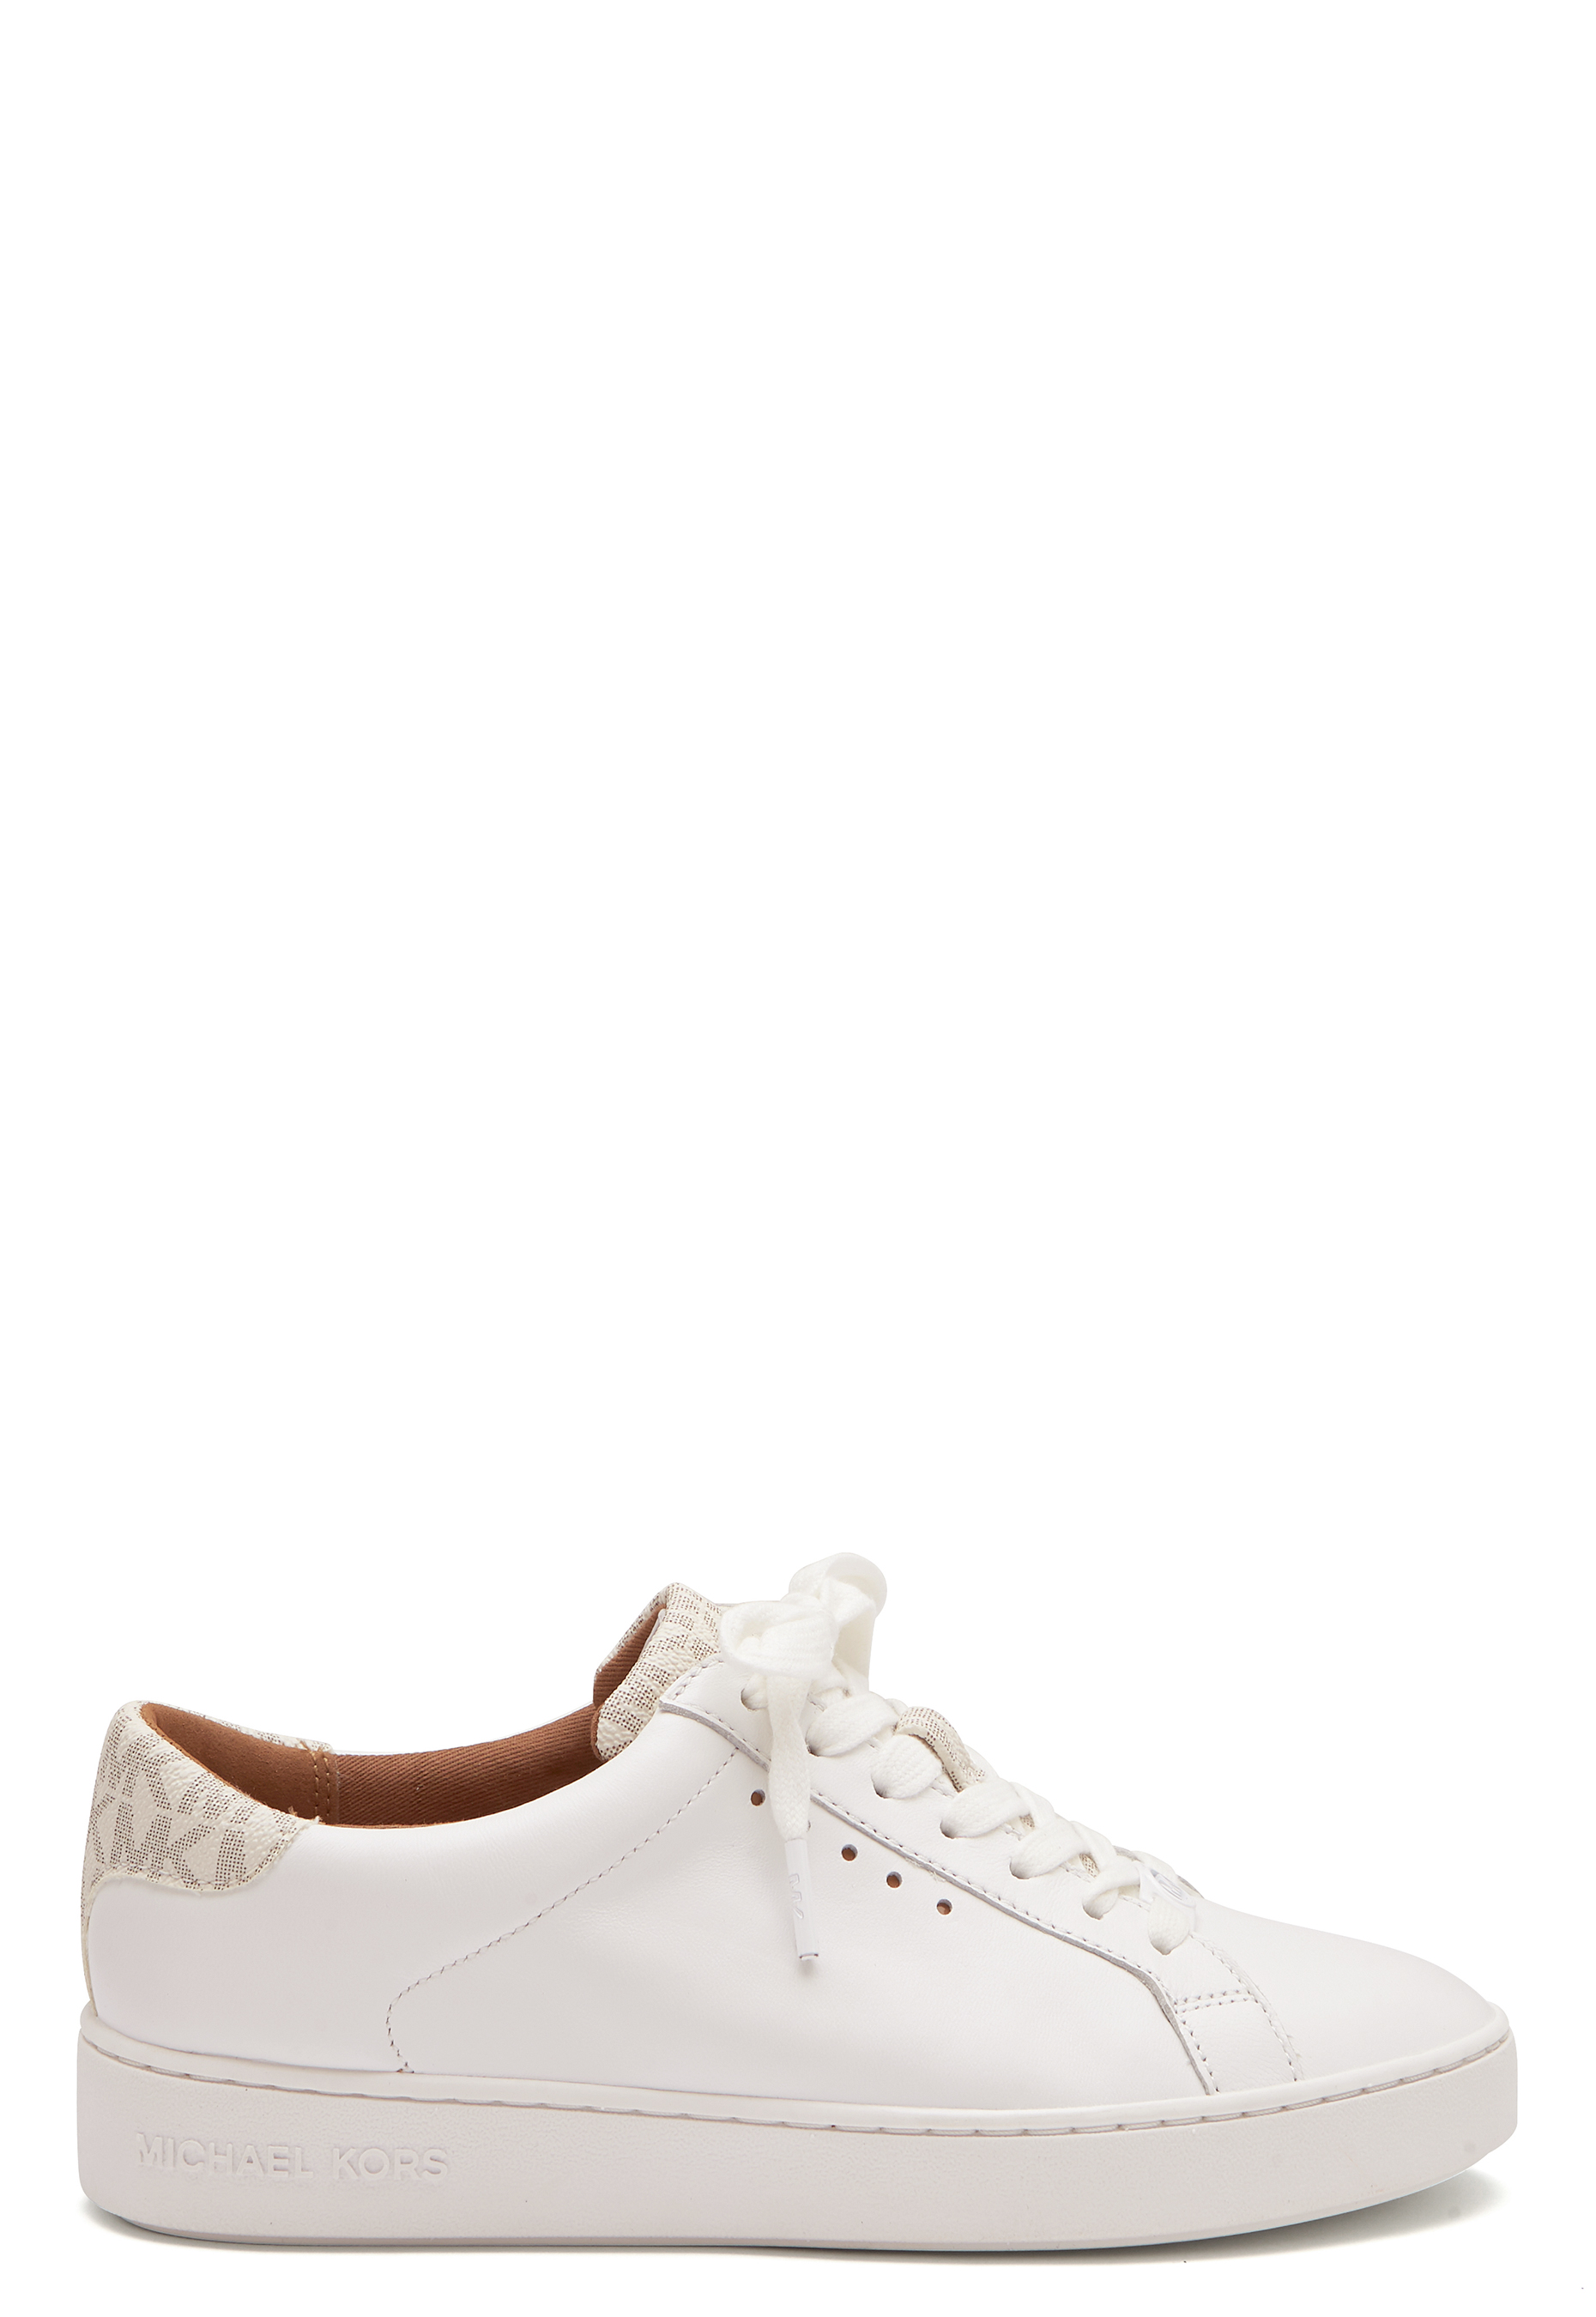 michael kors sneakers irving lace up